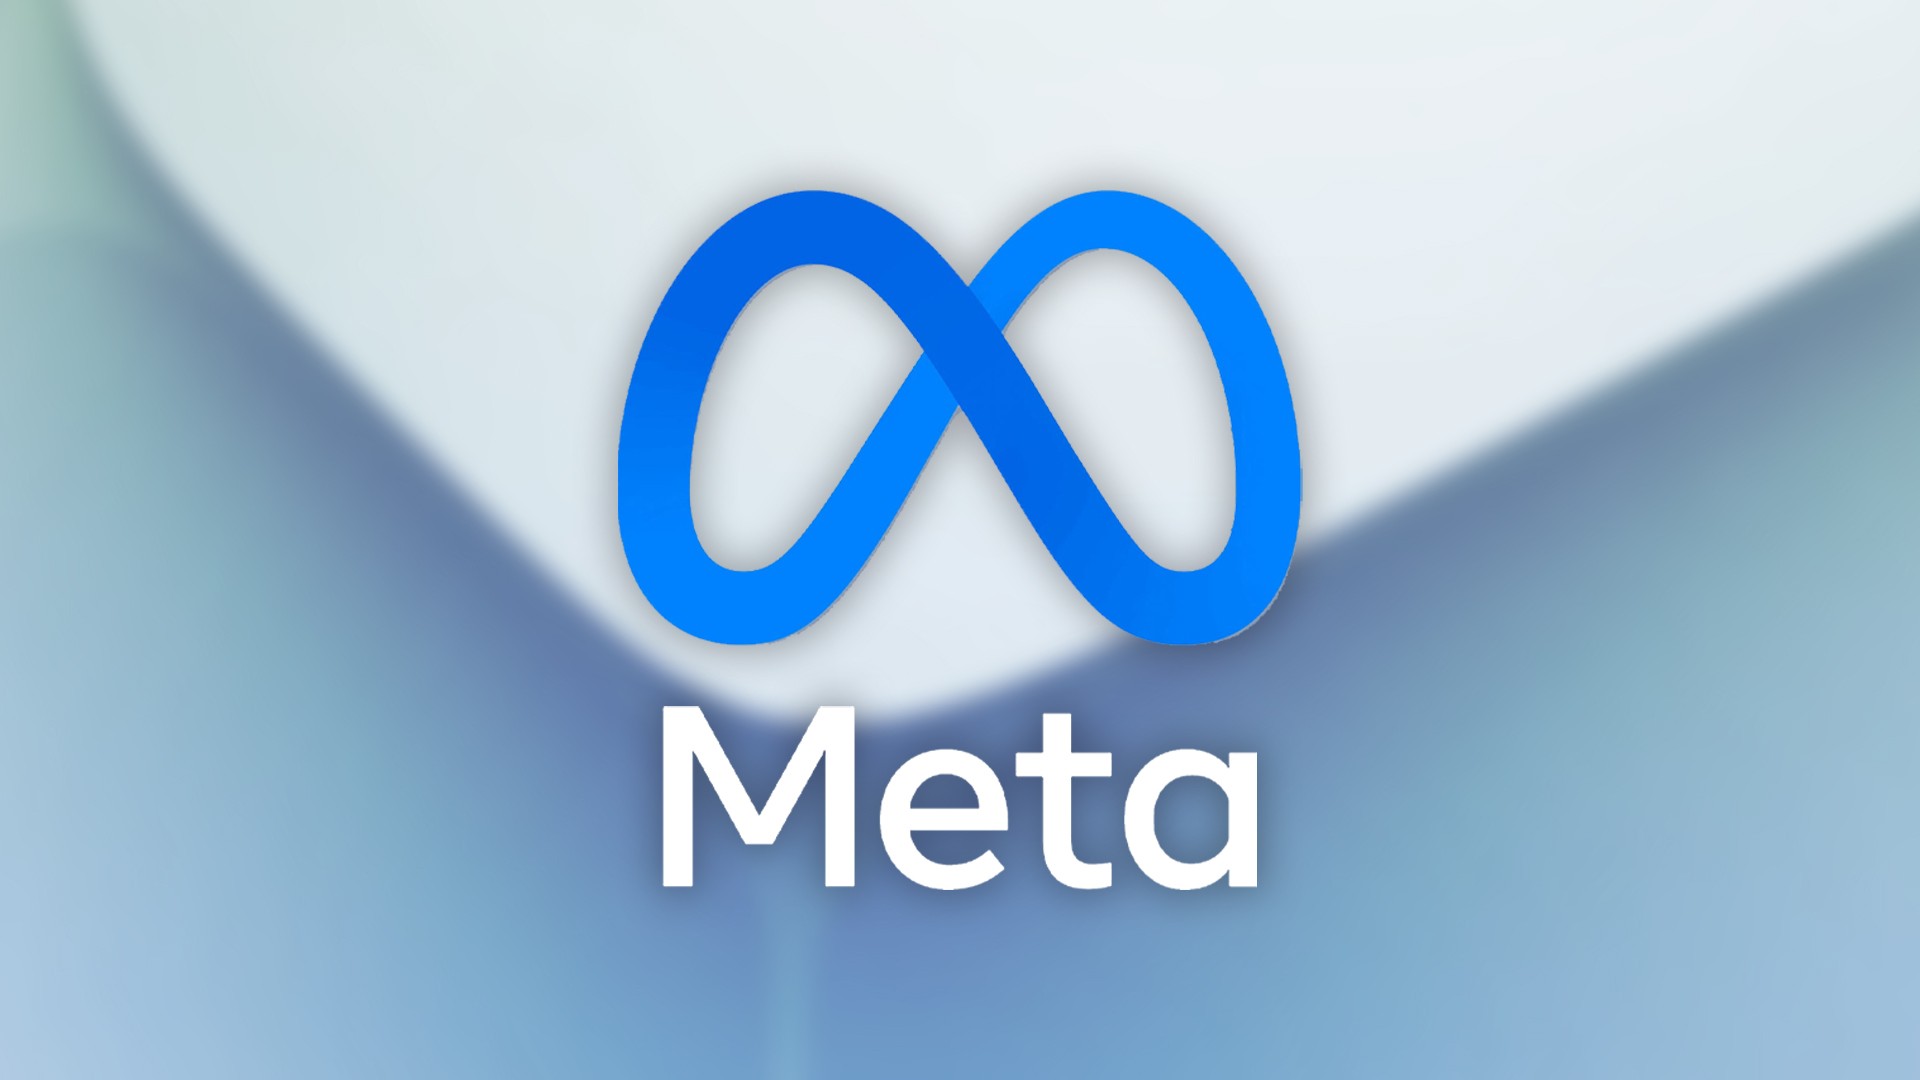 Meta announces privacy features for teens on Facebook and Instagram
